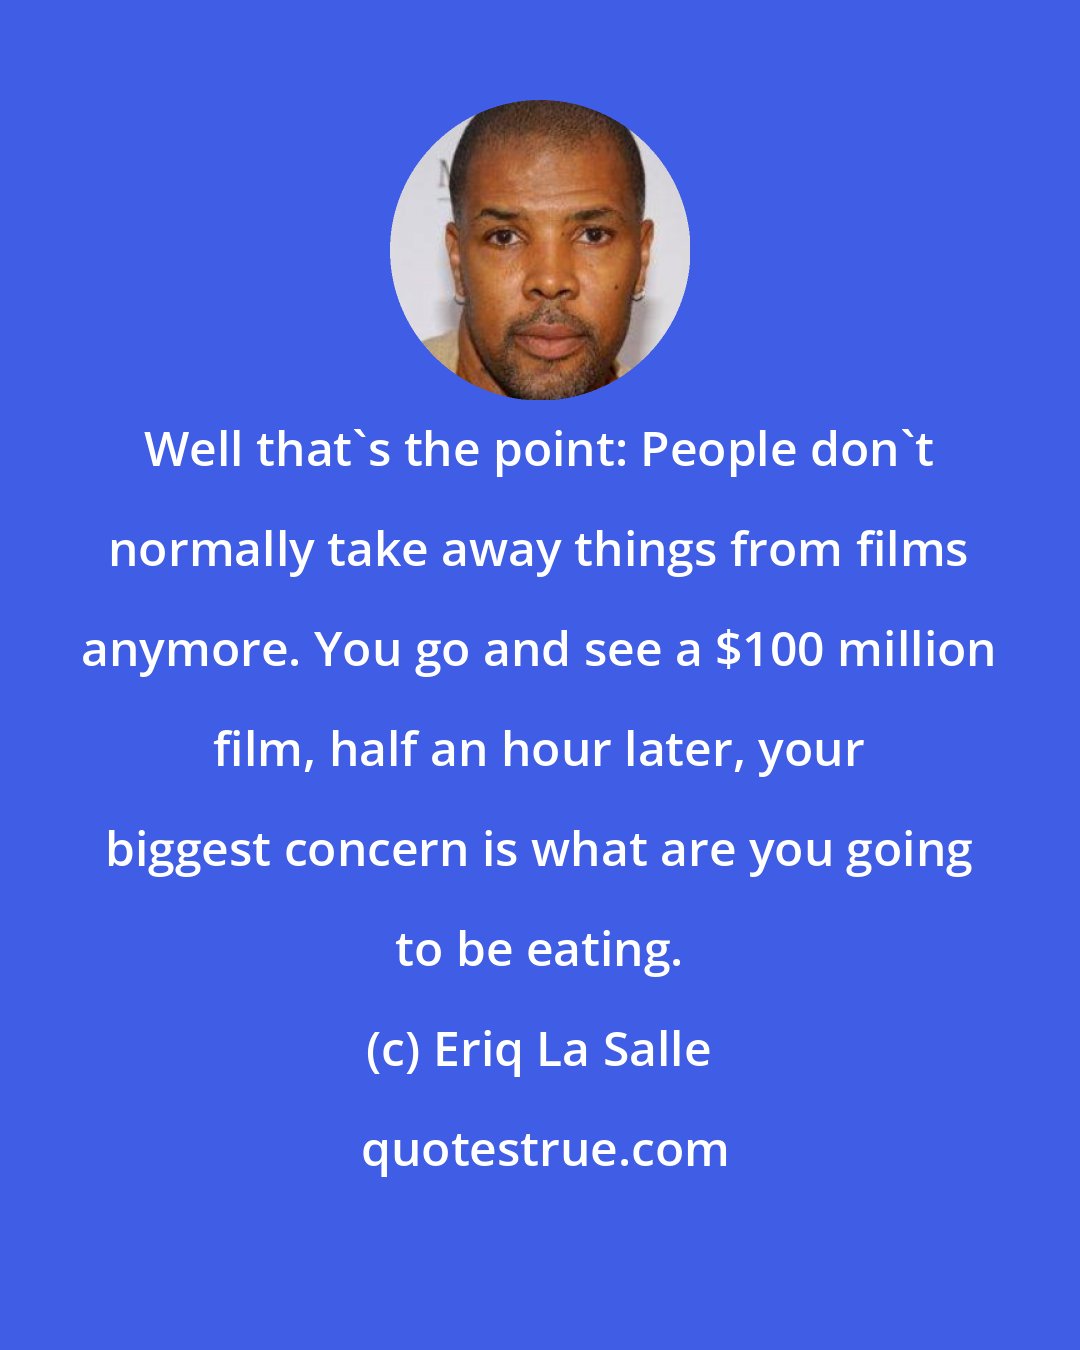 Eriq La Salle: Well that's the point: People don't normally take away things from films anymore. You go and see a $100 million film, half an hour later, your biggest concern is what are you going to be eating.